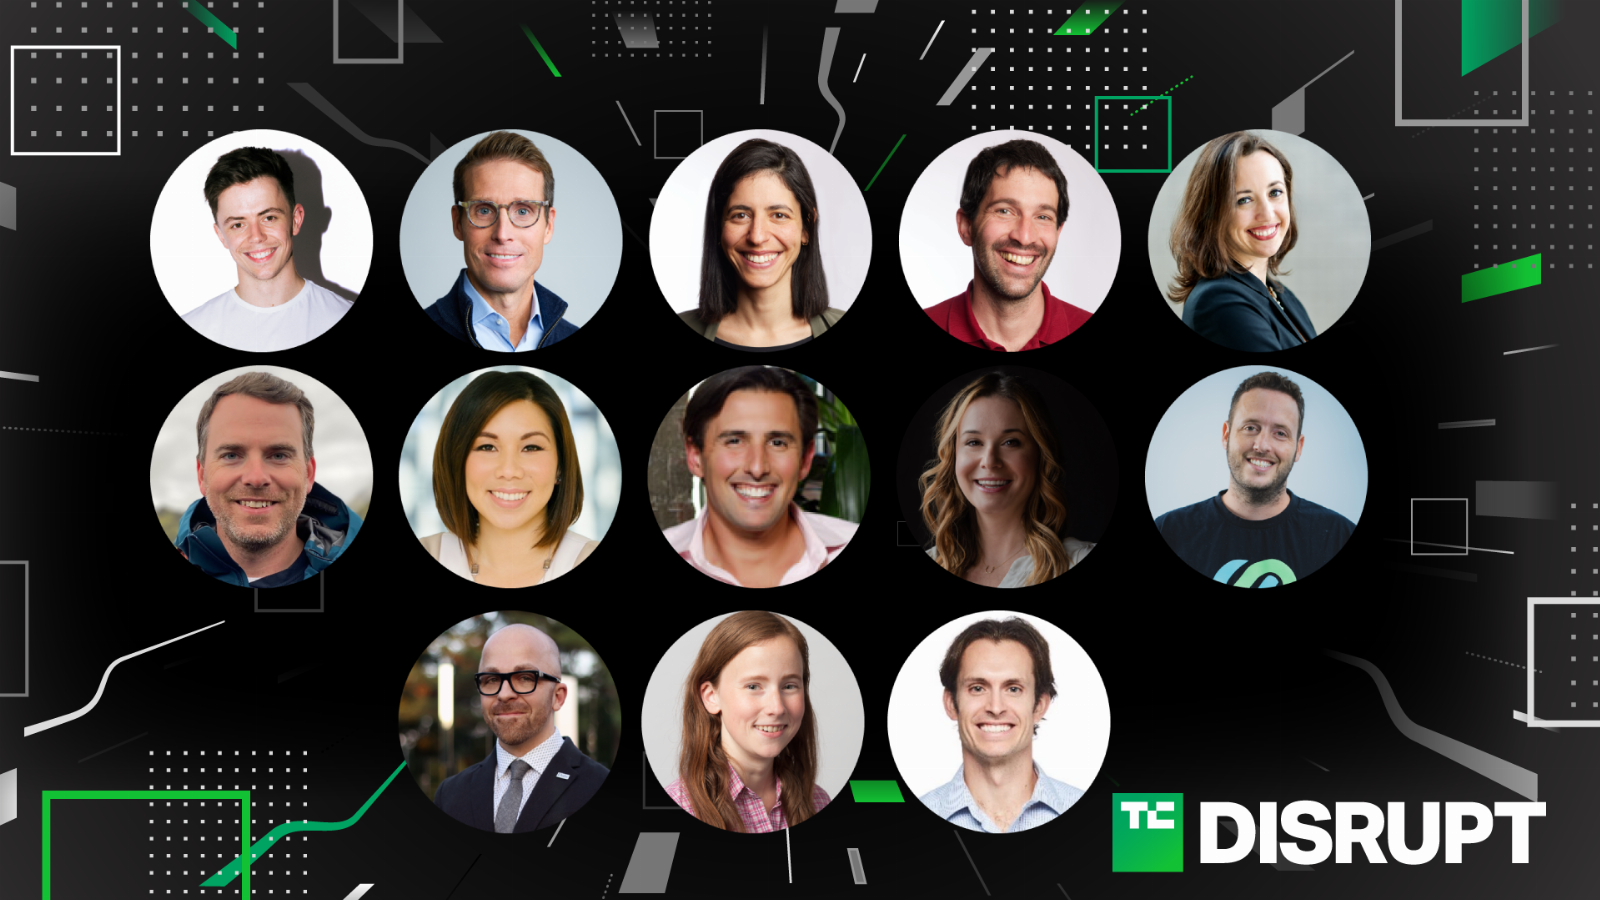 Introducing the Disrupt Audience Choice breakout winners